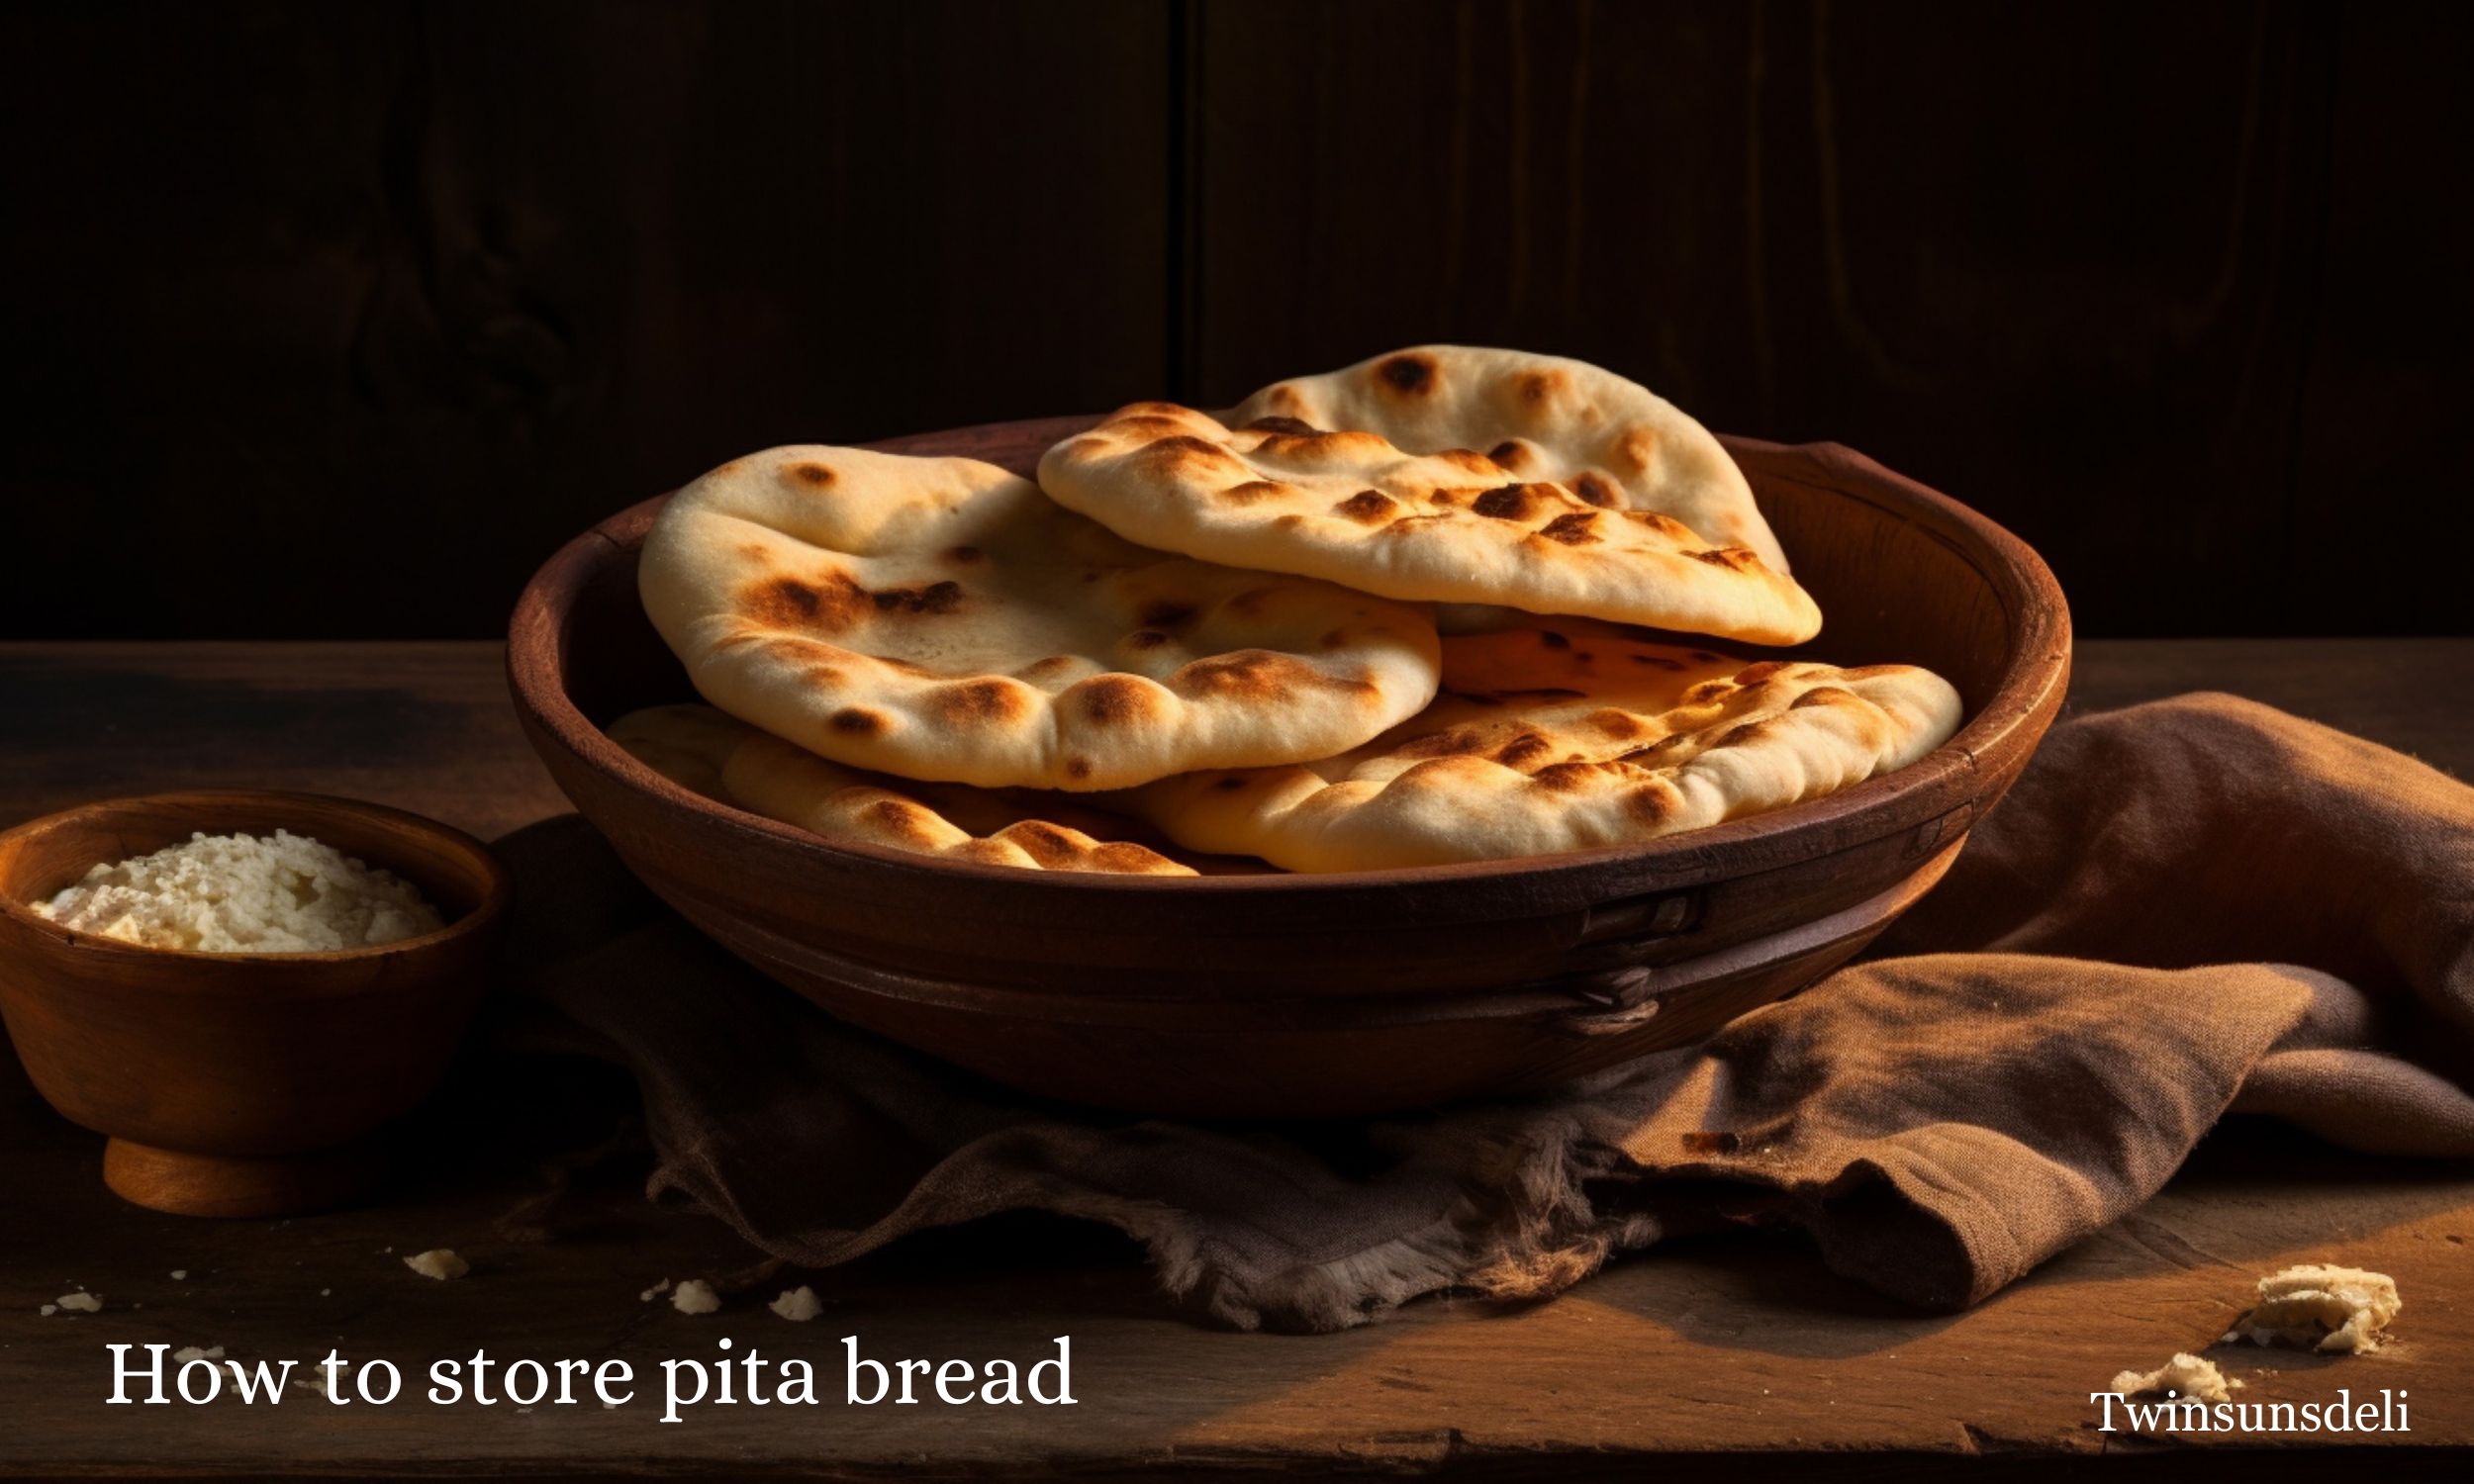 How to store pita bread